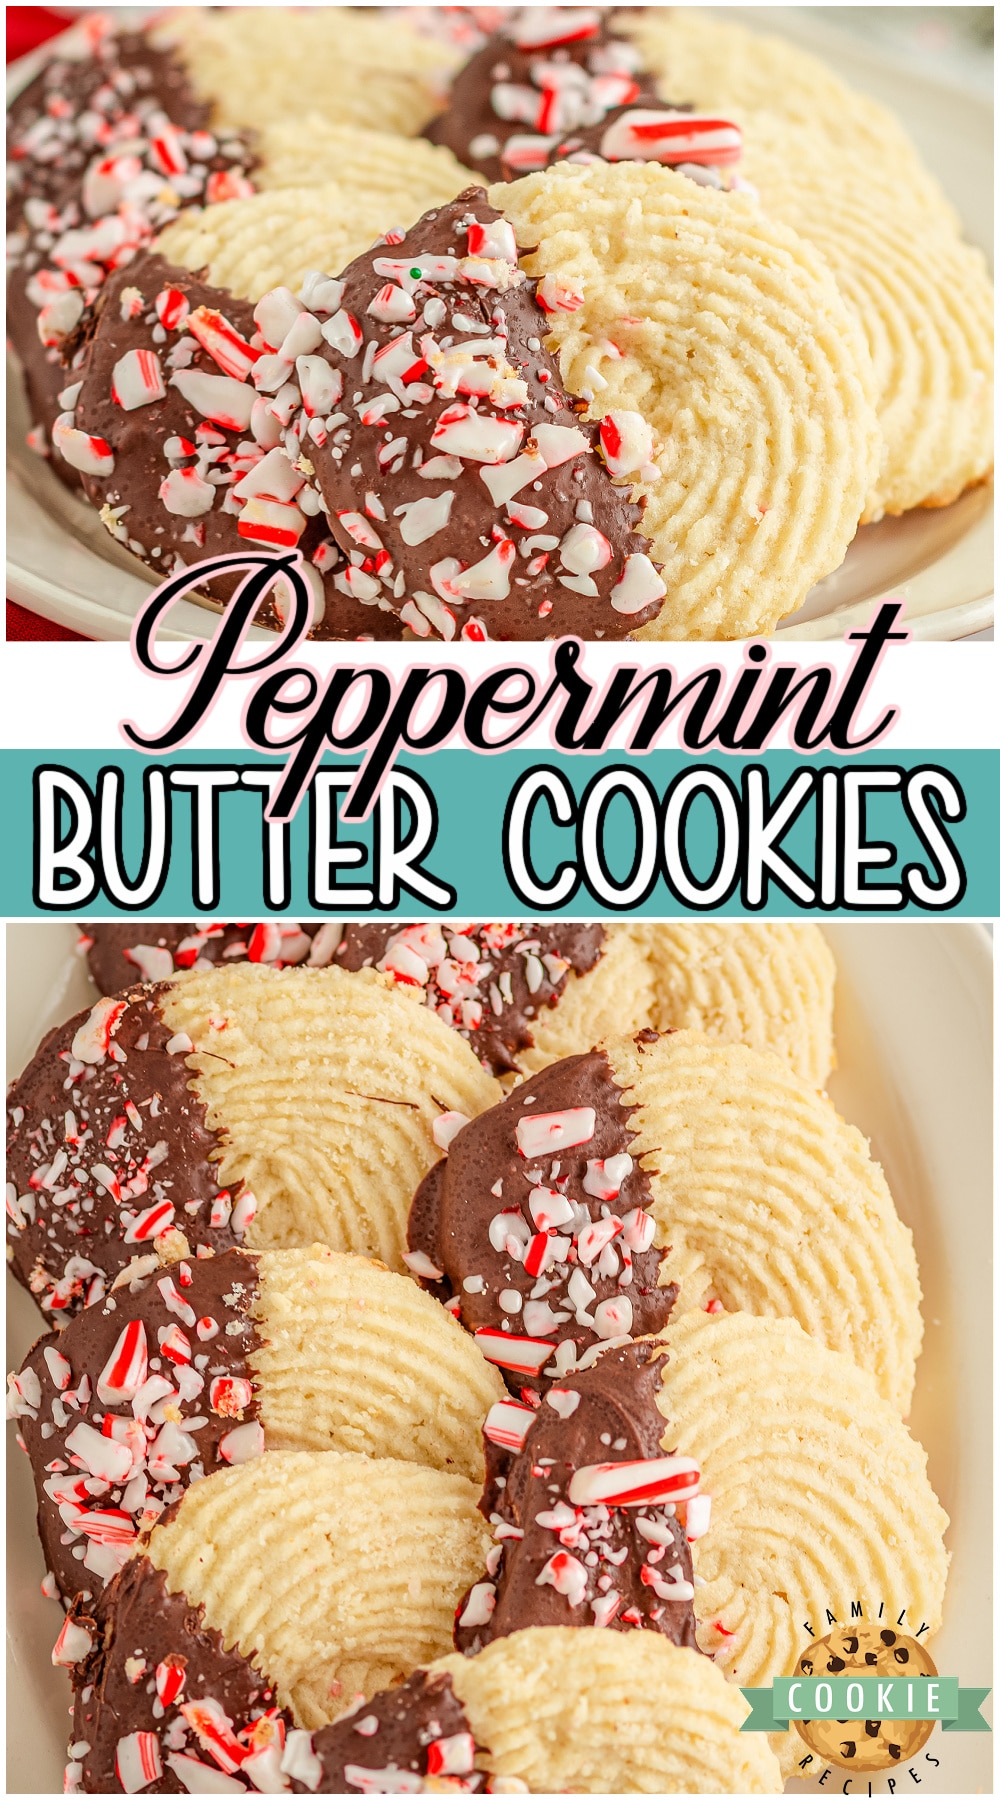 Peppermint butter cookies made easy with classic ingredients, then dipped in chocolate and sprinkled with peppermint! Delicious flavor in these buttery crisp, delicate Christmas cookies!